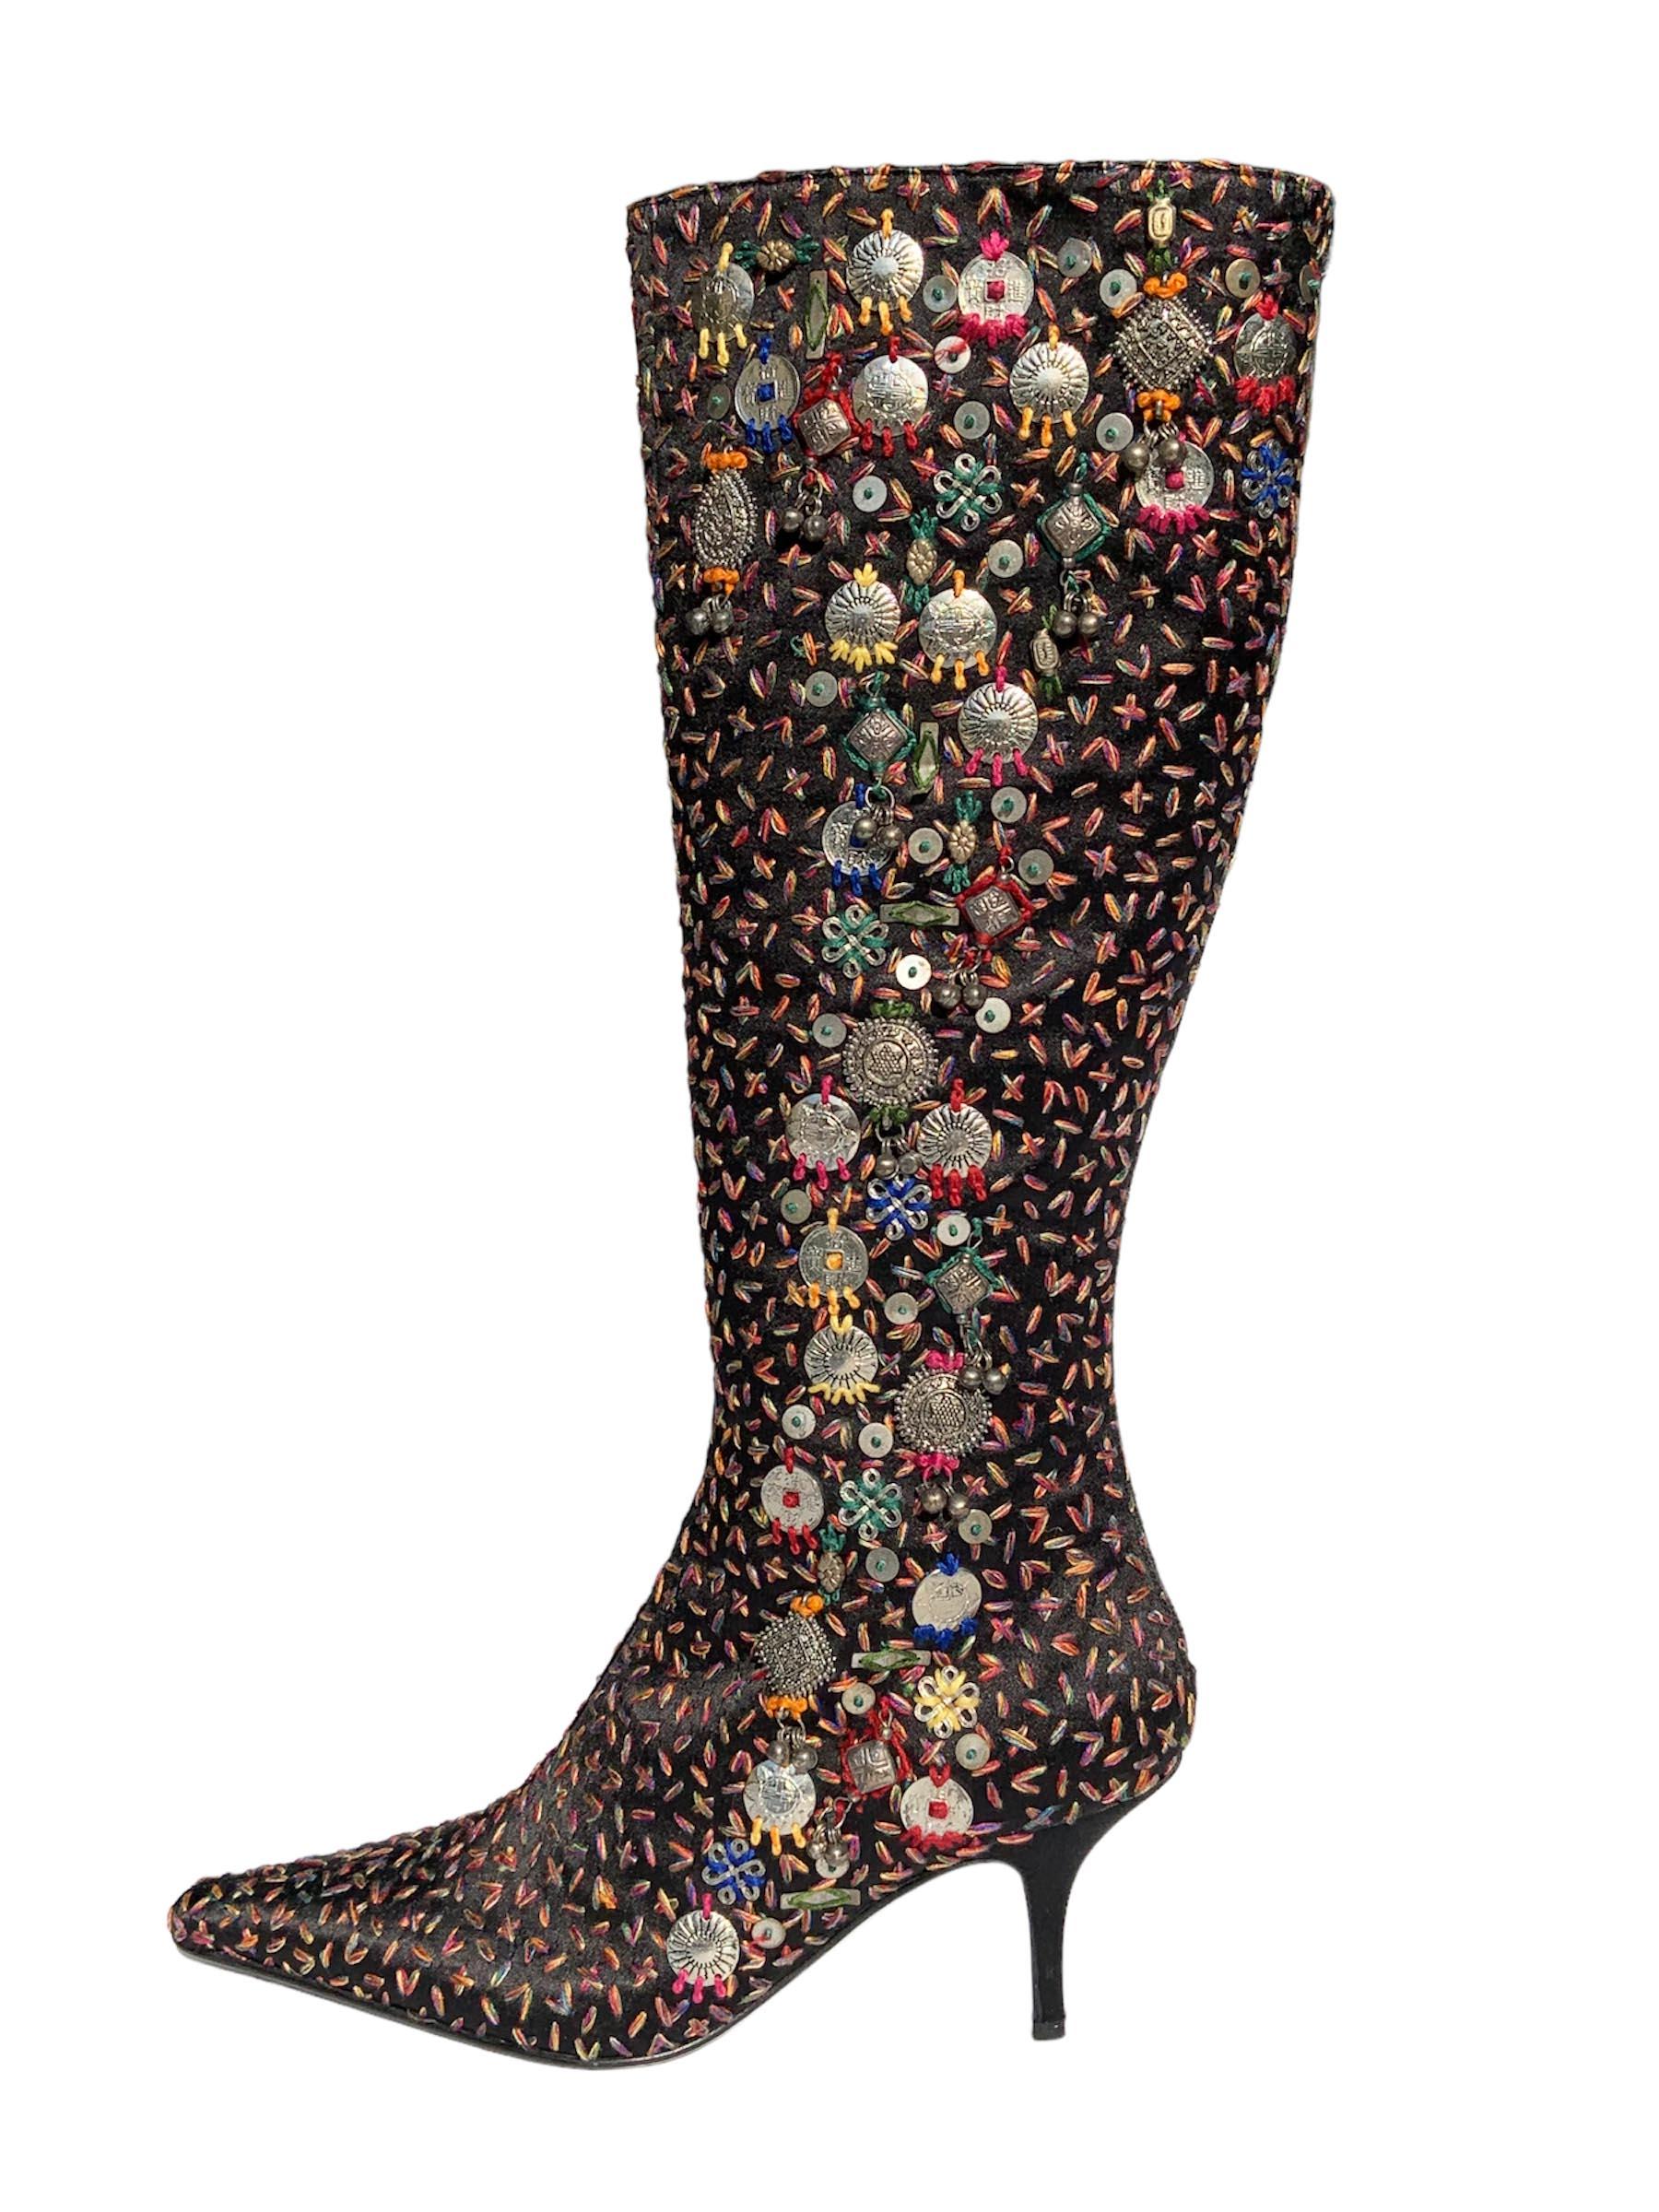 New Oscar de la Renta Coin Embellished and Embroidered Knee High Boots
Vintage Early 90's
Italian size 37 ( US 7 )
Black satin embroidered boots finished with exquisite silver-tone coins with different symbols, and charms.
Fully lined in leather,